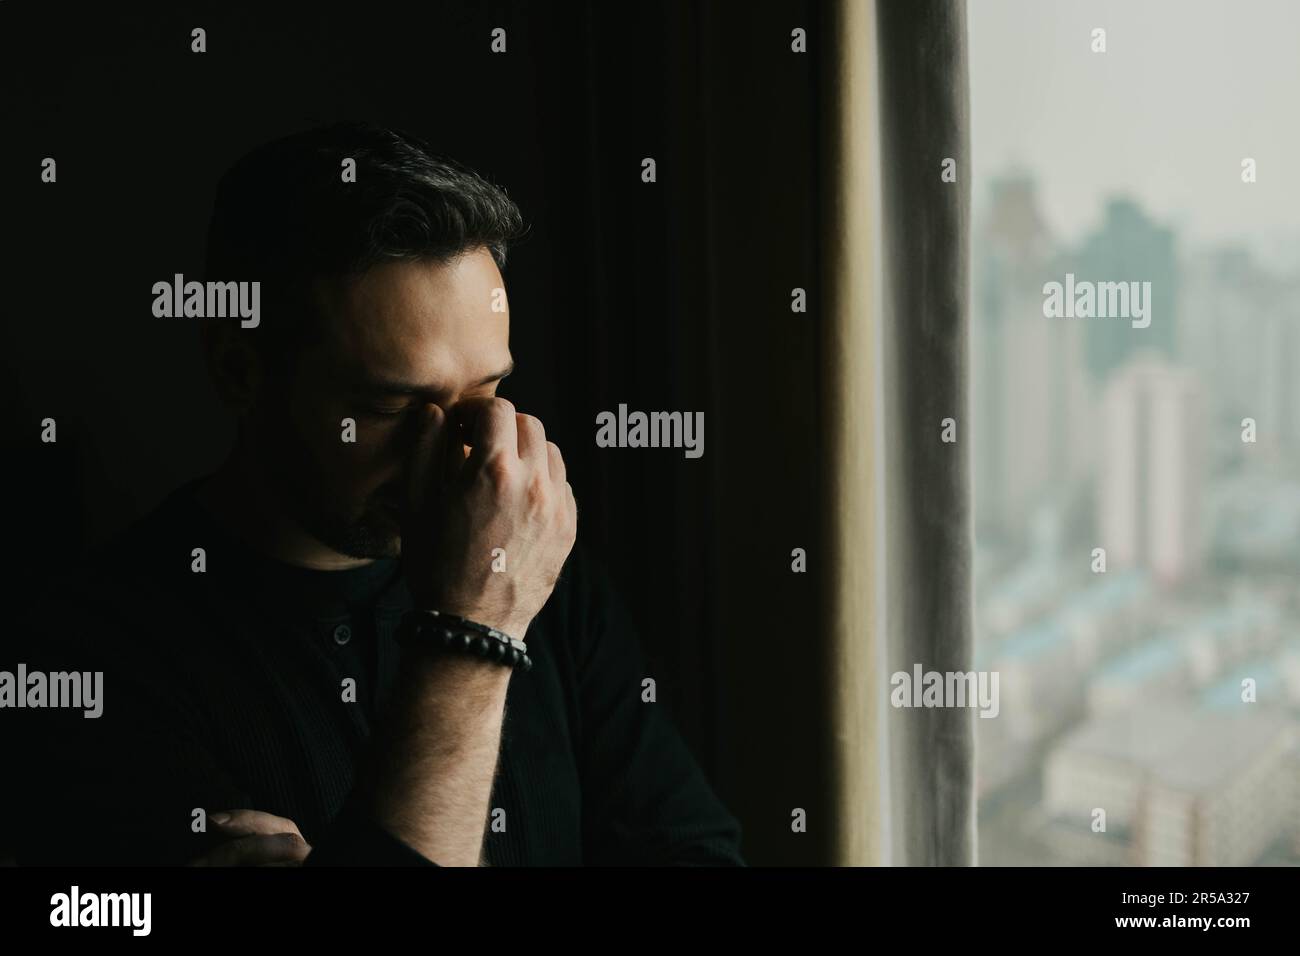 Frustrated man stands by a window and puts his hand to his face Stock Photo